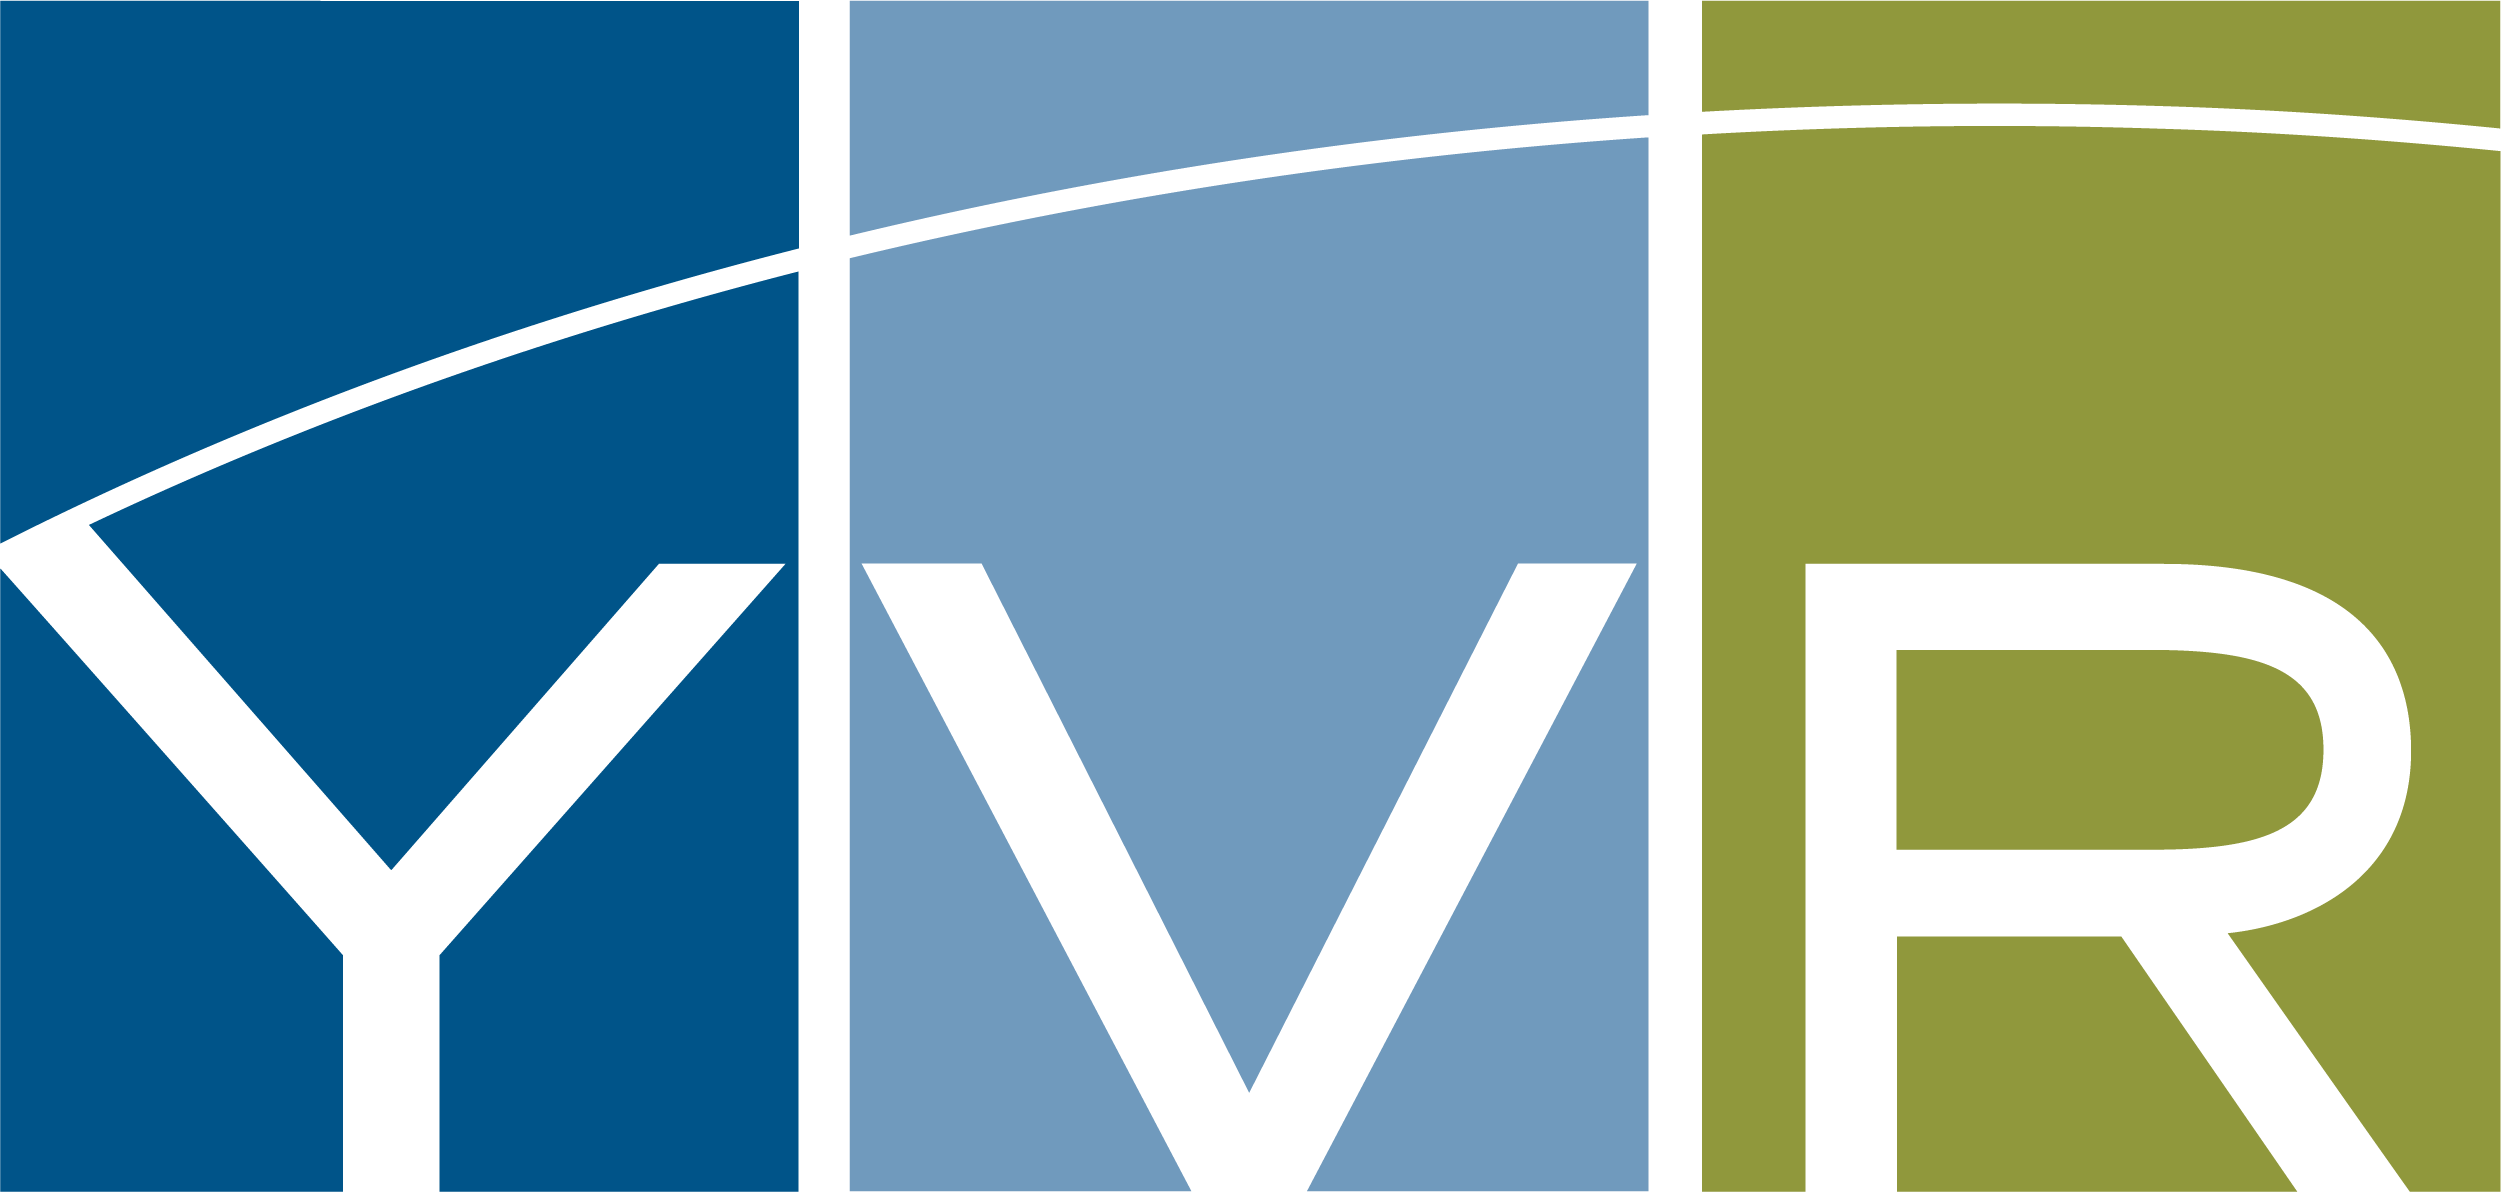 https://www.concordparking.com/wp-content/uploads/2021/12/vancouver-international-airport-yvr-logo-vector.png